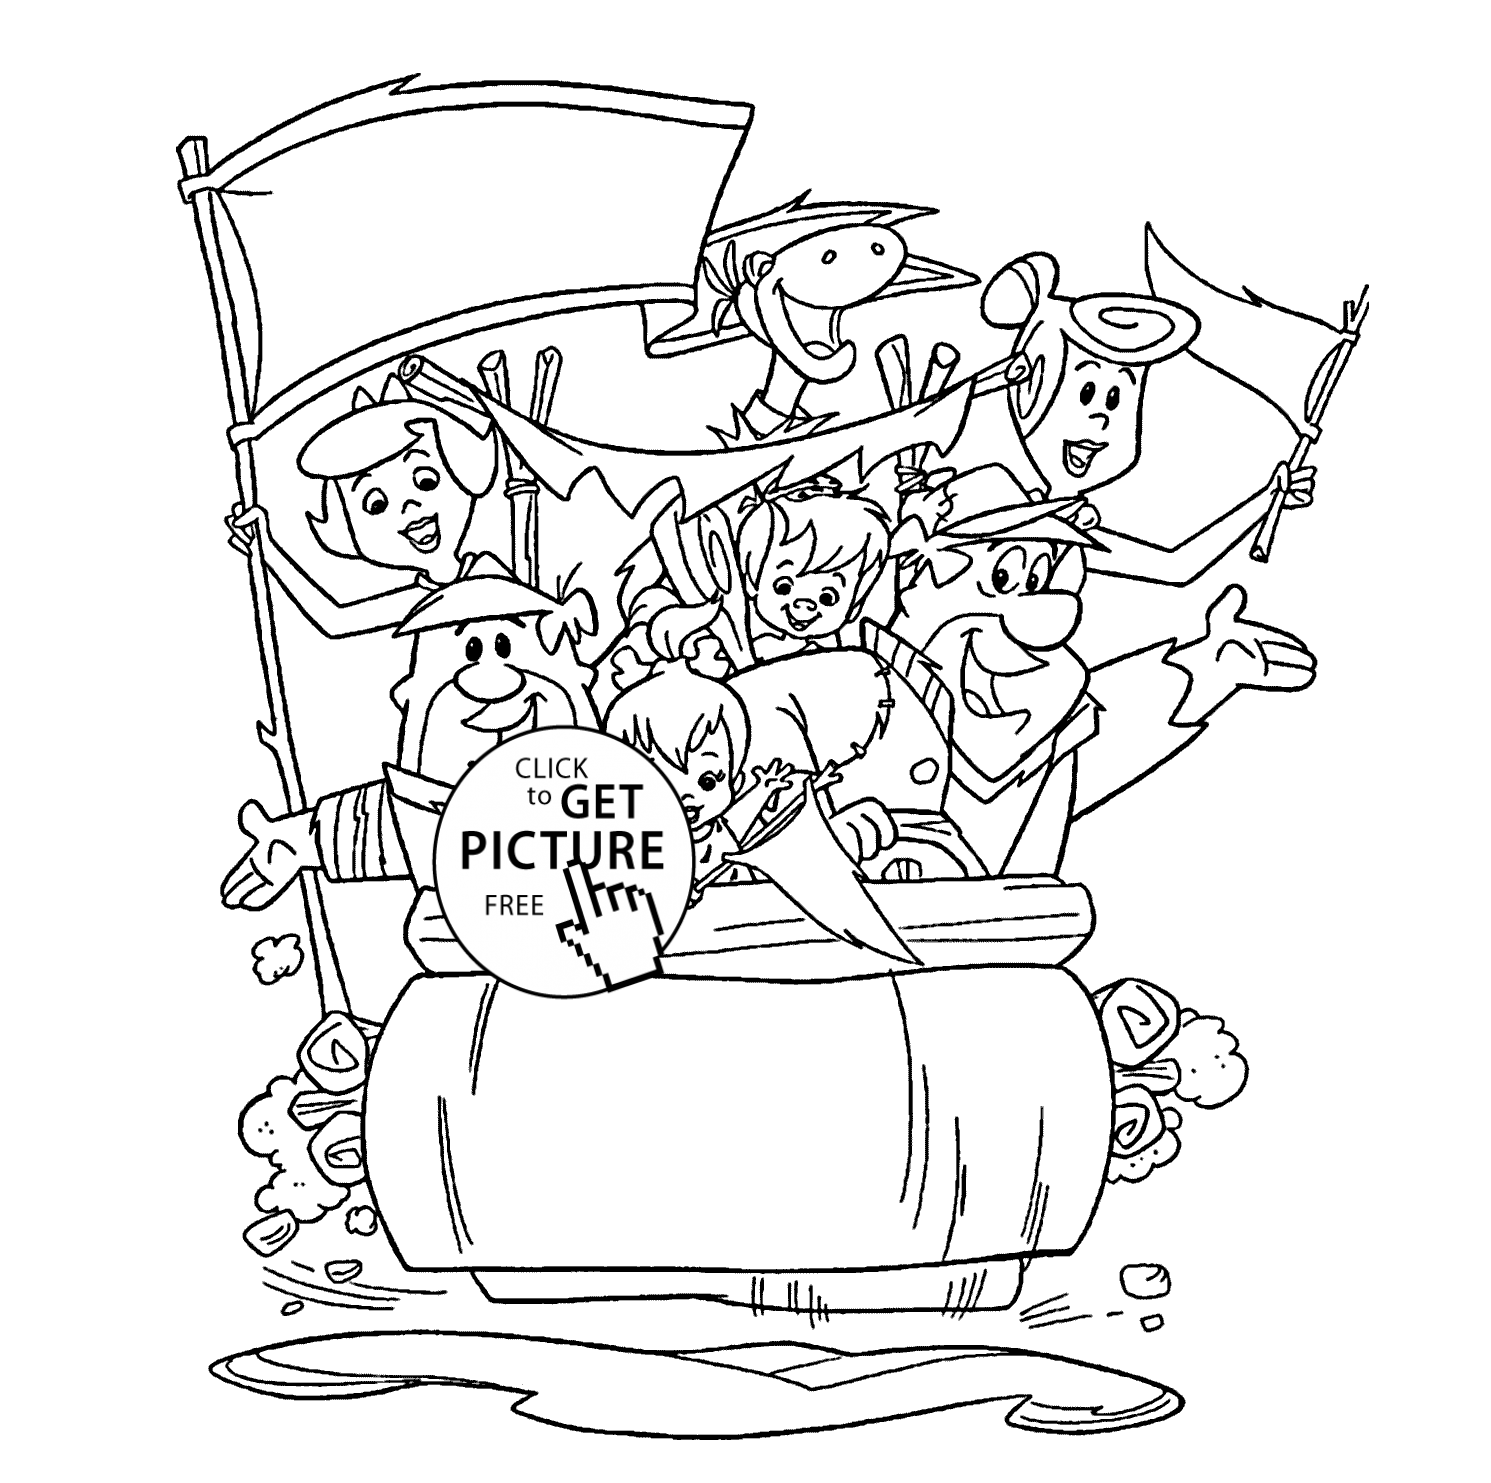 Funny Flintstones coloring pages for kids, printable free ...